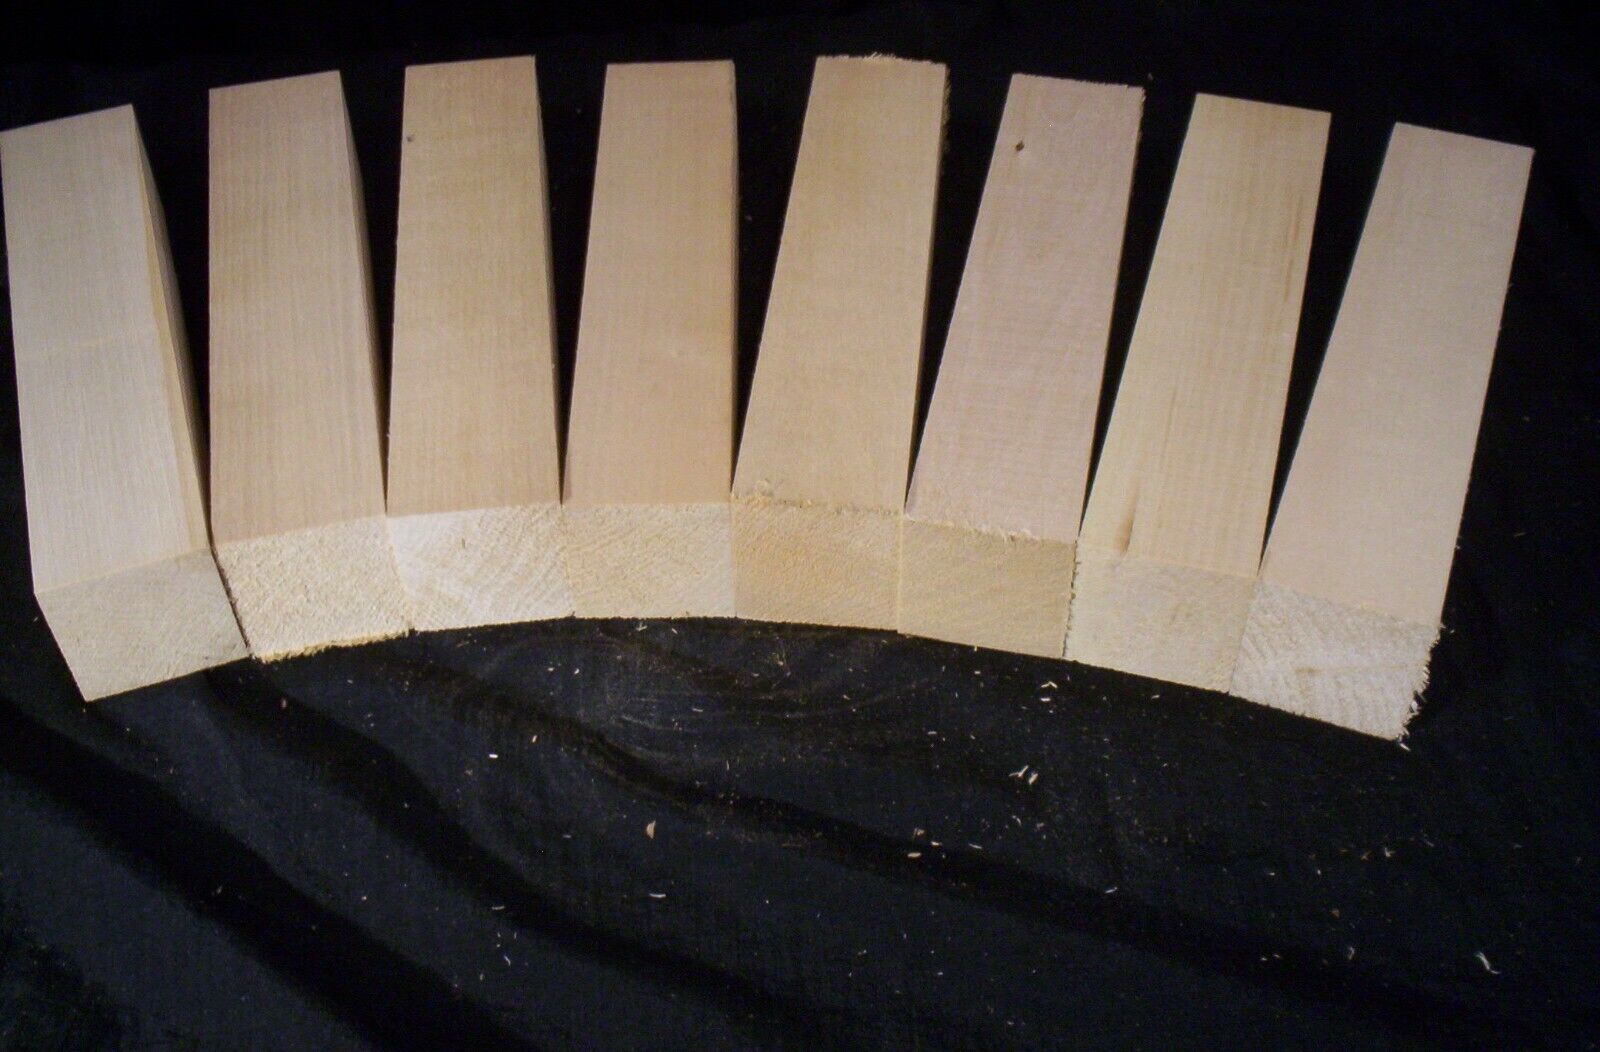 8 Piece Basswood  1 1/2 X 1 1/2 X 5 1/2" Carving Blanks Craft Wood Lumber